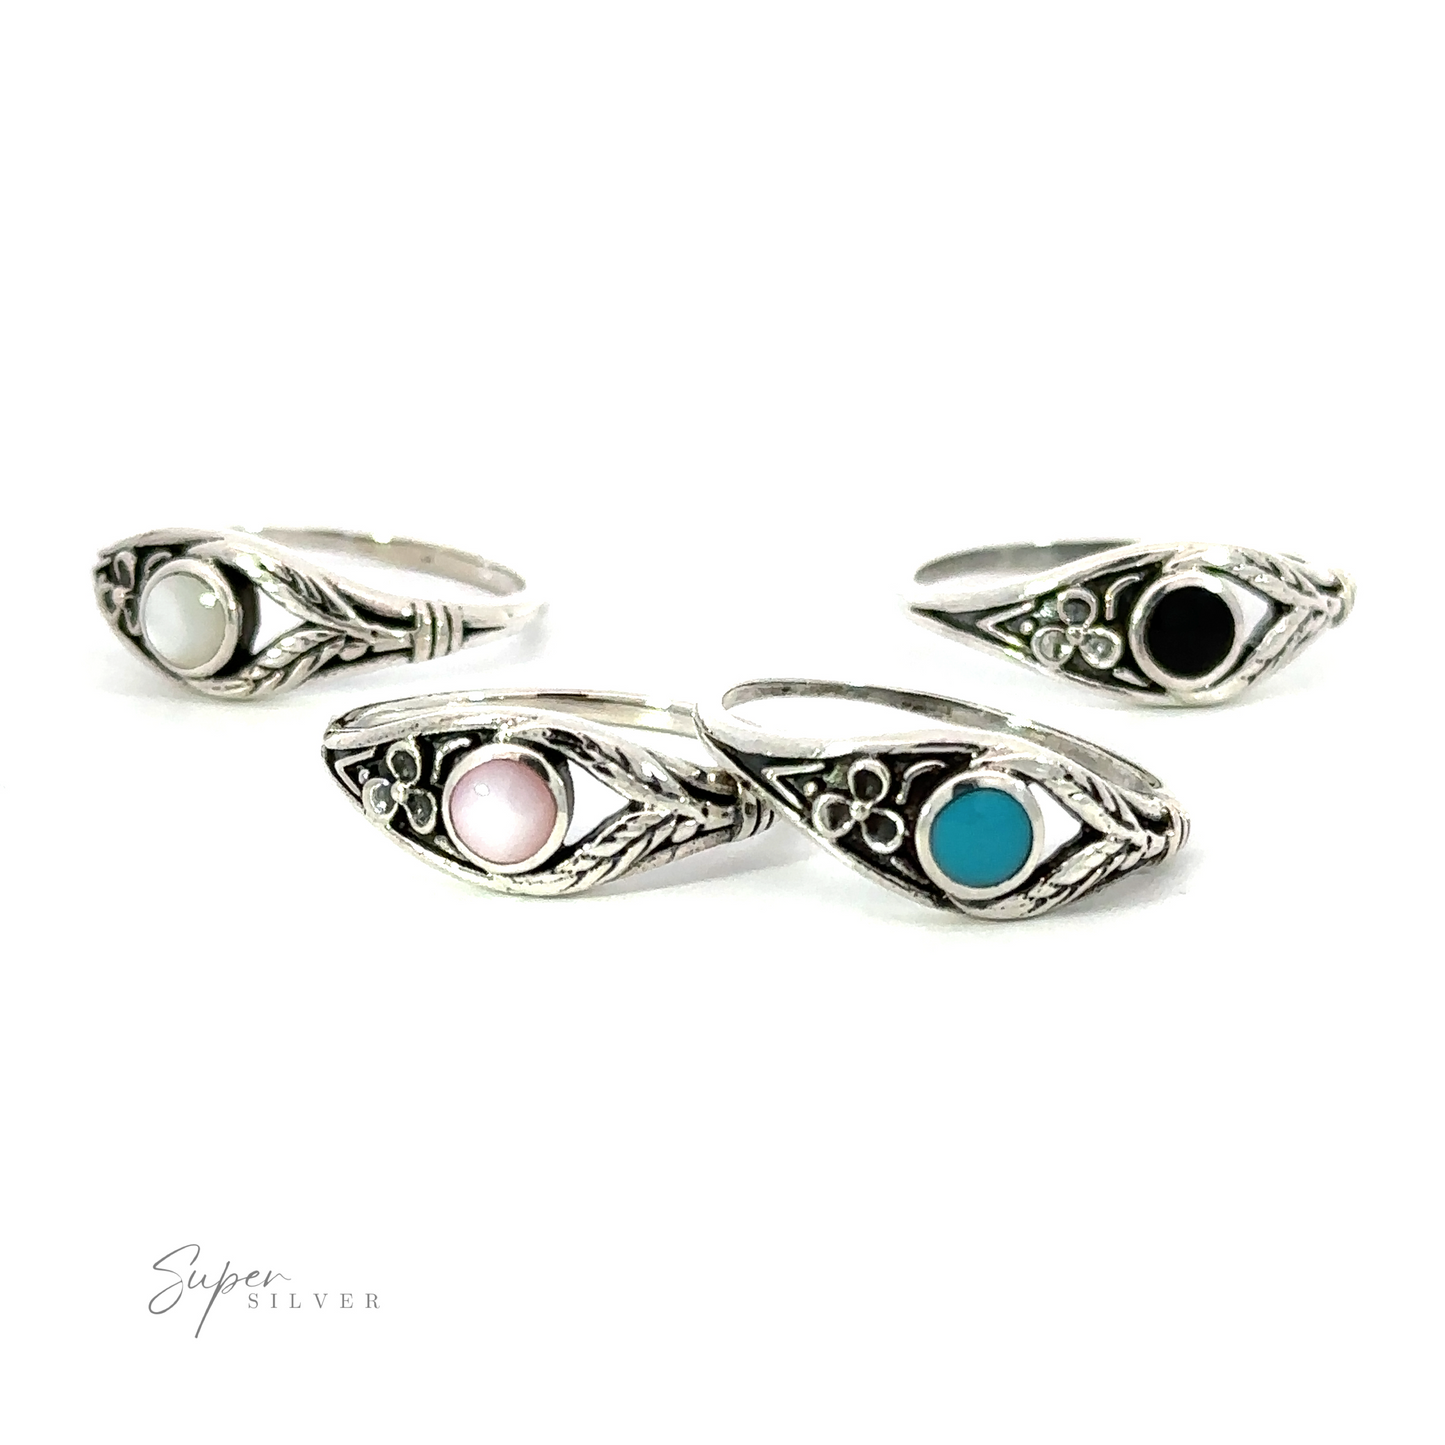 Three silver rings with different colored stones, featuring Inlay Stone Ring with Flower and Leaf Design designs and Inlay Stone Ring with Flower and Leaf Design circle stone ring. Made from .925 Sterling Silver.